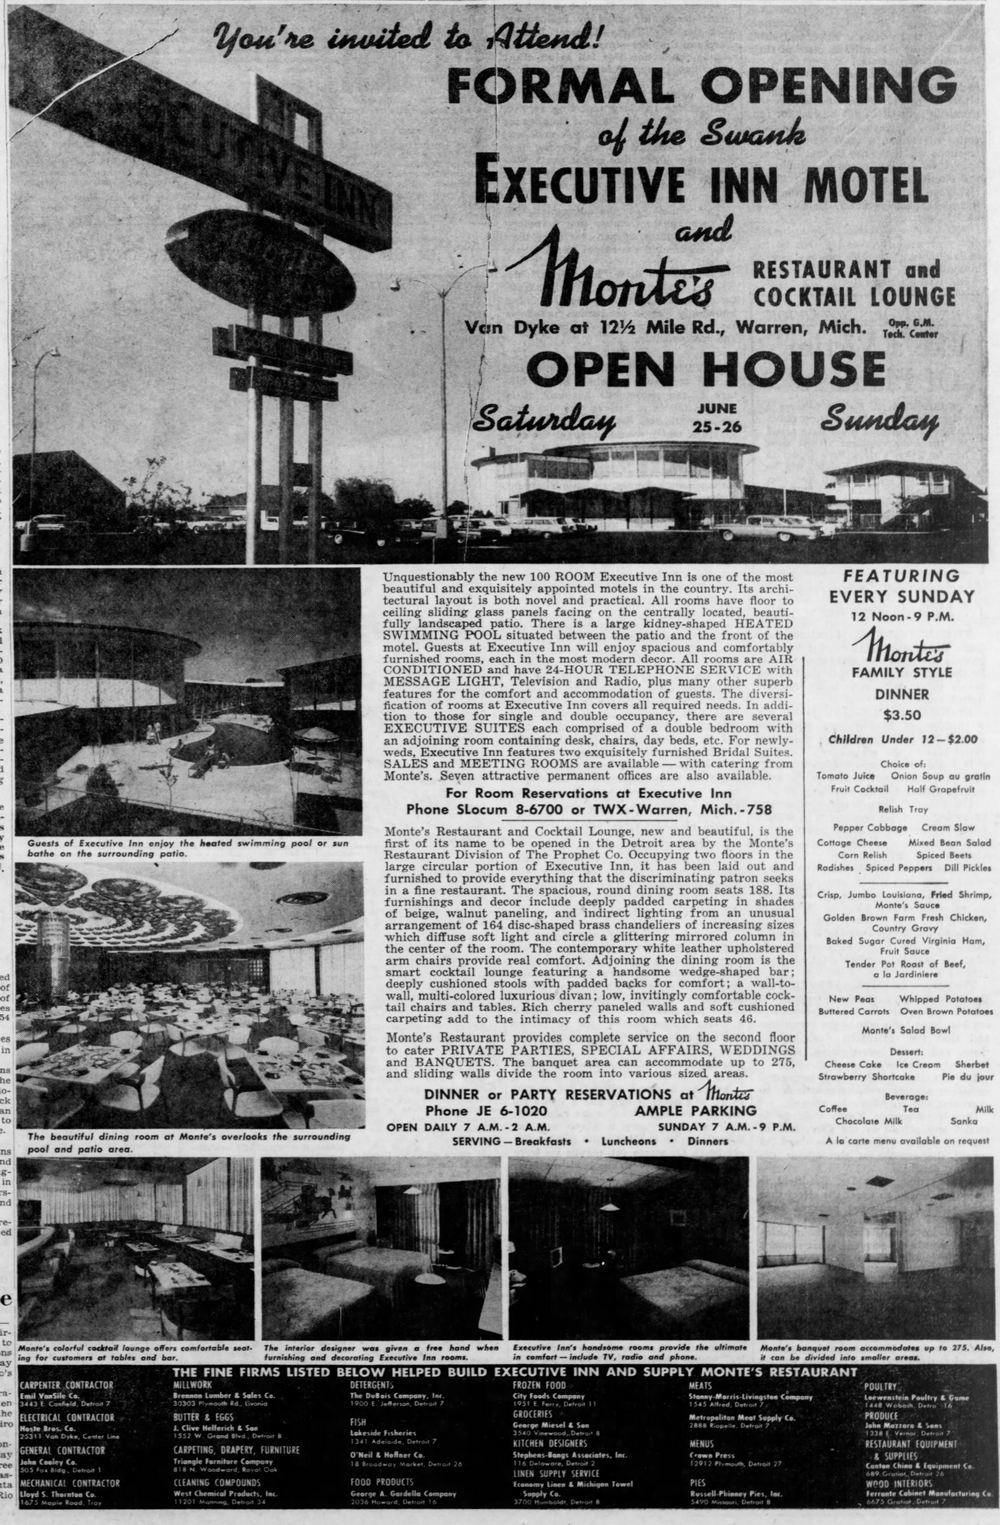 Executive Inn Motel - June 1960 Full Page Opening Announcement